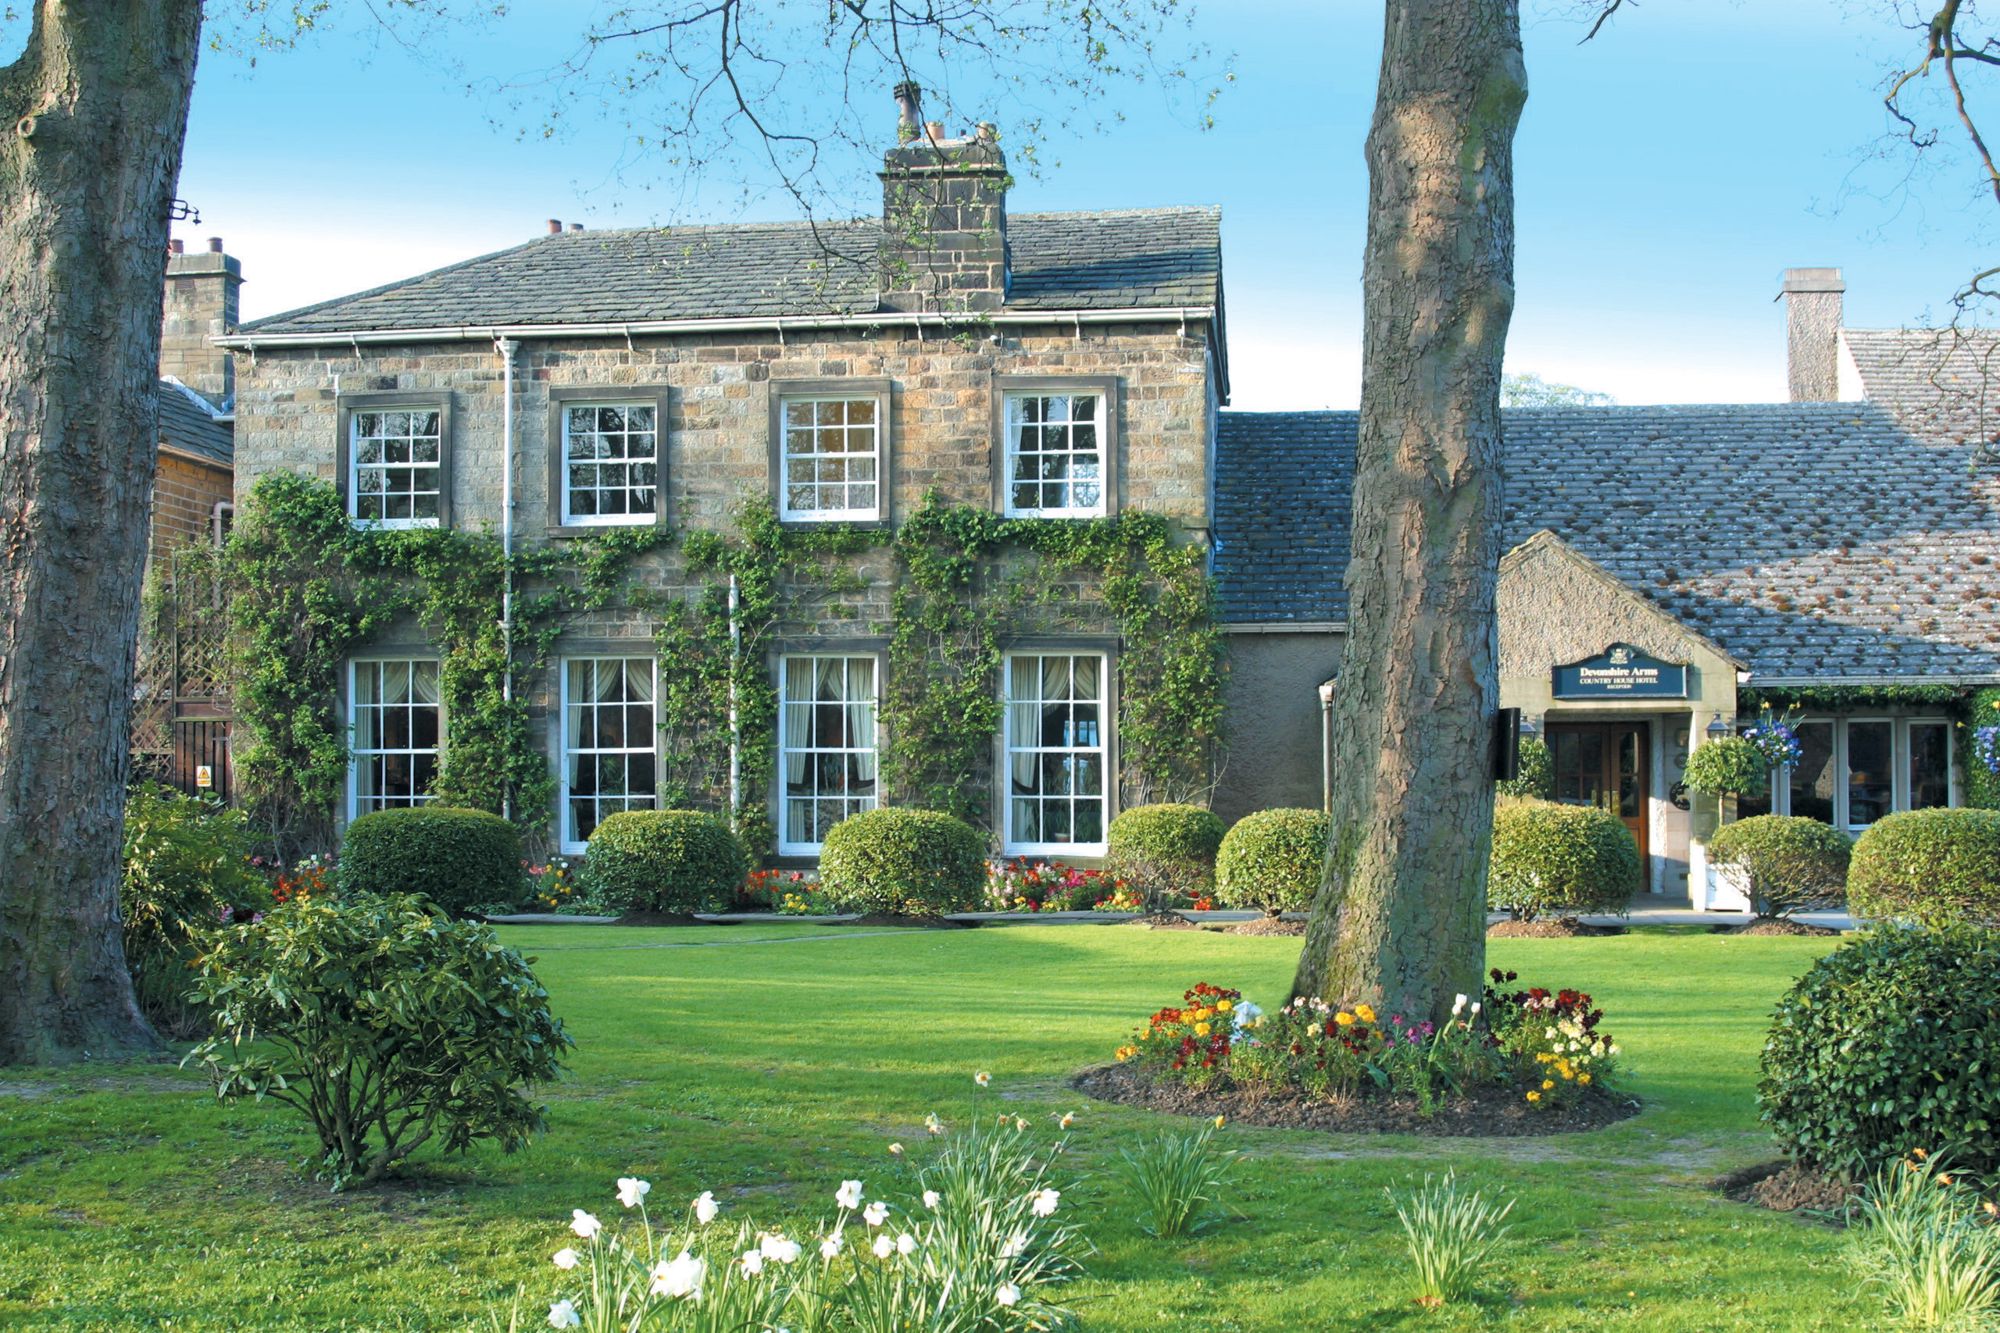 Hotels in North Yorkshire holidays at Cool Places